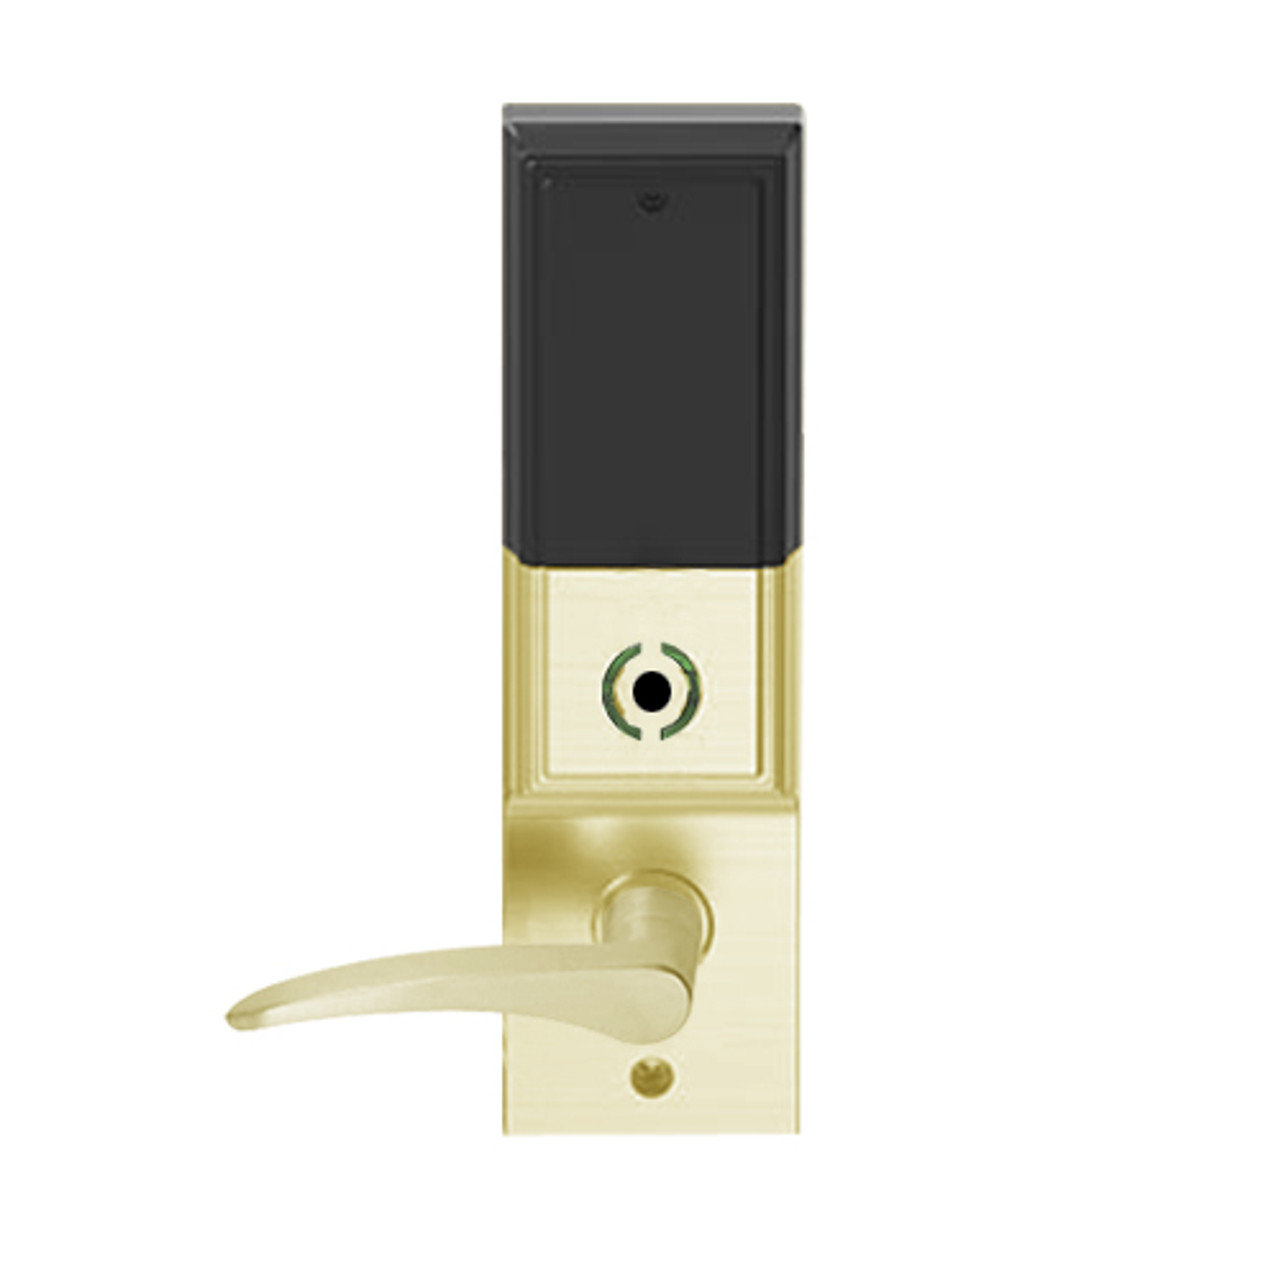 LEMB-ADD-L-12-606-RH Schlage Less Mortise Cylinder Privacy/Office Wireless Addison Mortise Lock with Push Button, LED and 12 Lever in Satin Brass